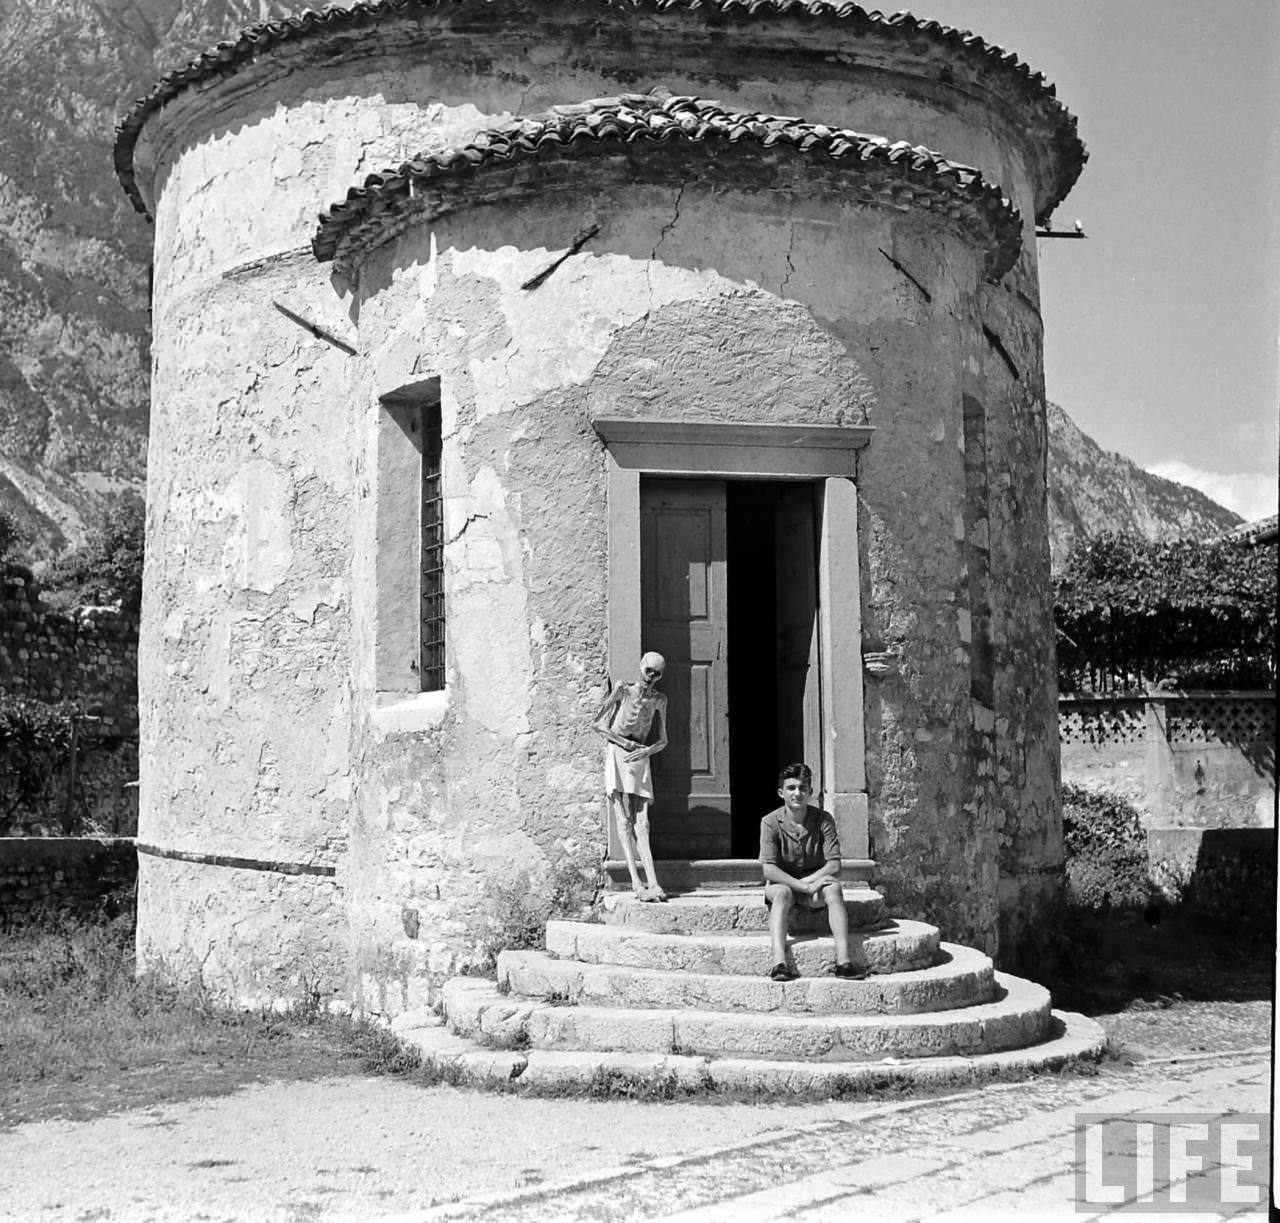 People Living with a Normal Life with Mummies in Venzone, Italy in 1950